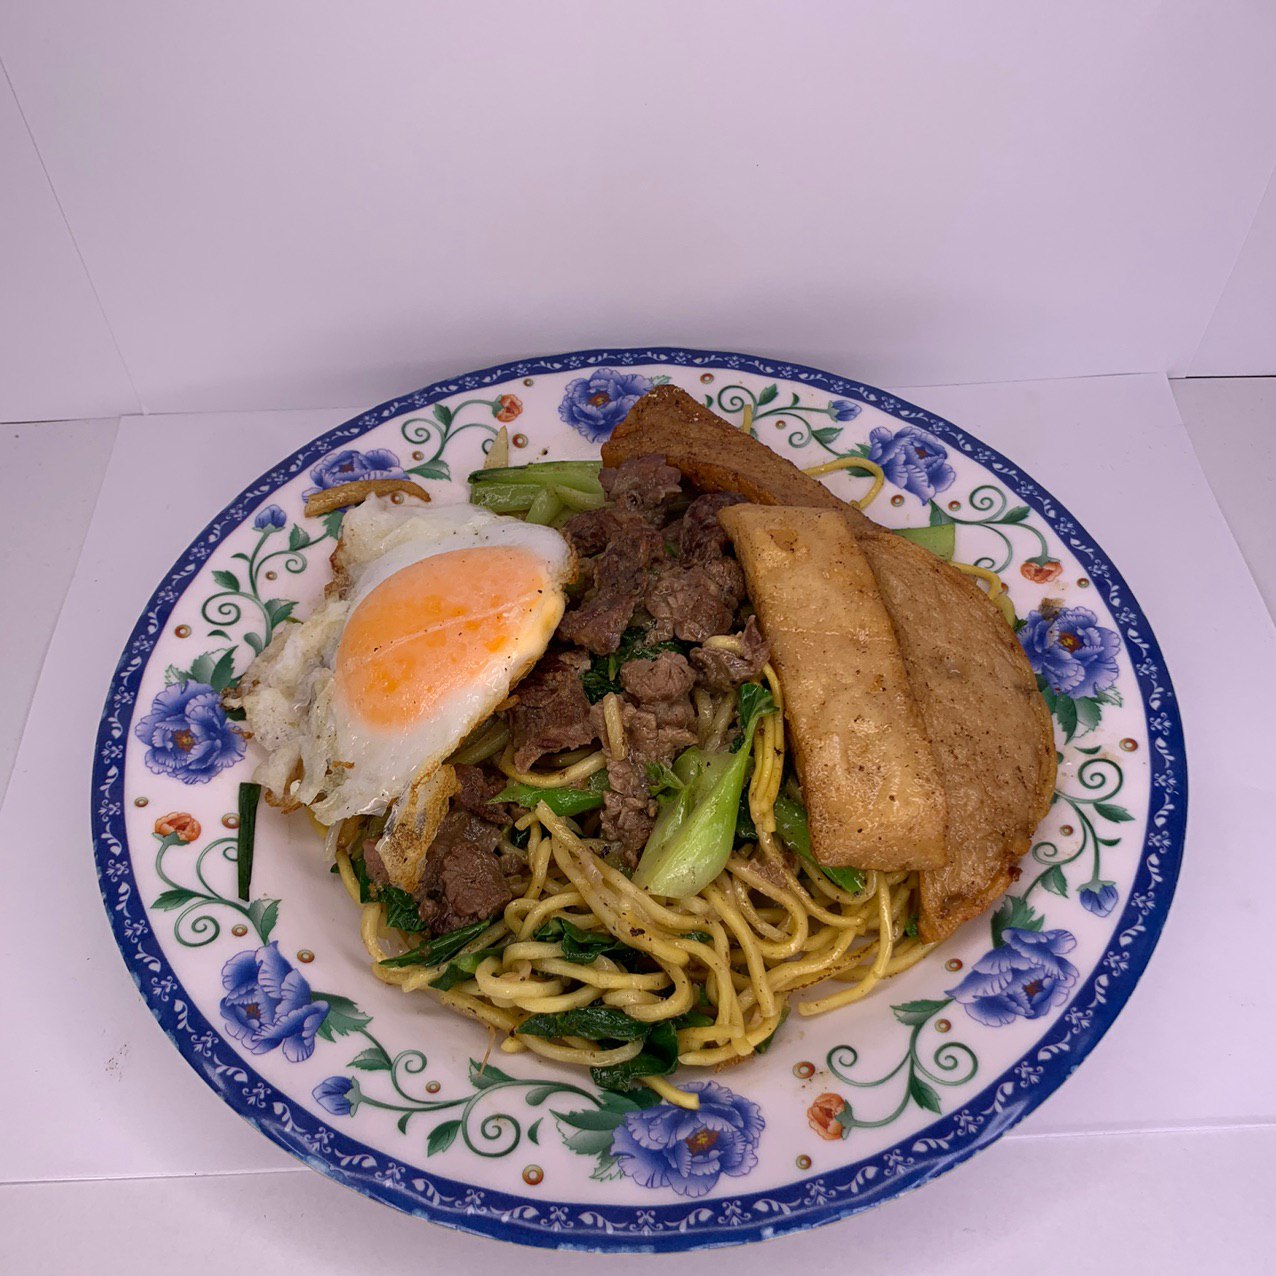 05.Fried Round Noodle with Patte, Beef and Egg